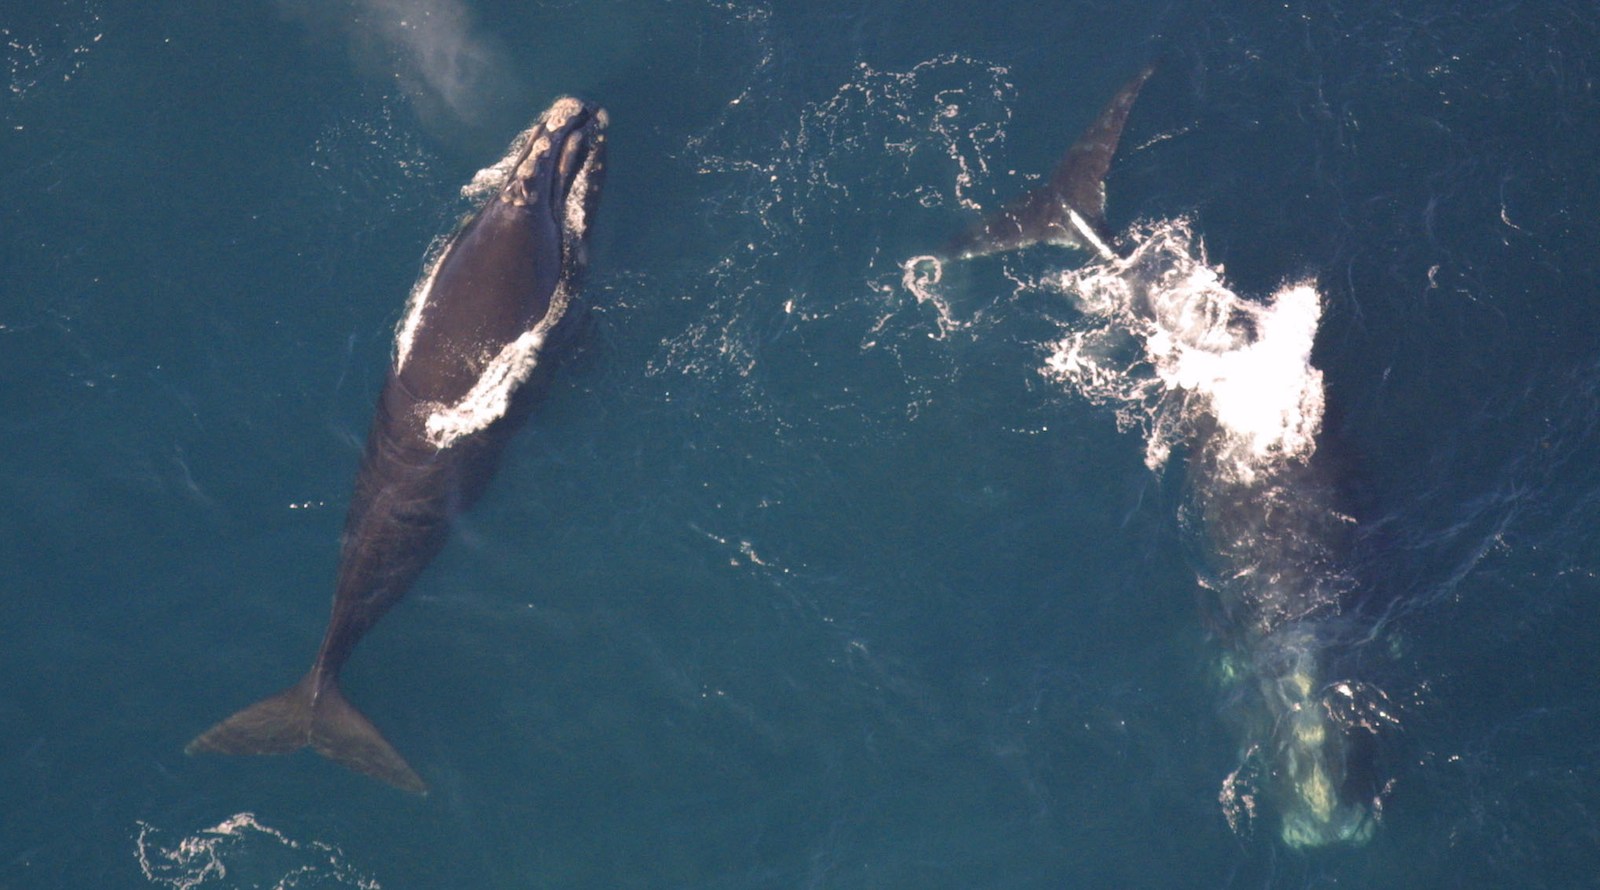 Notifying speeding mariners lowers ship speeds in areas with North Atlantic Right Whales